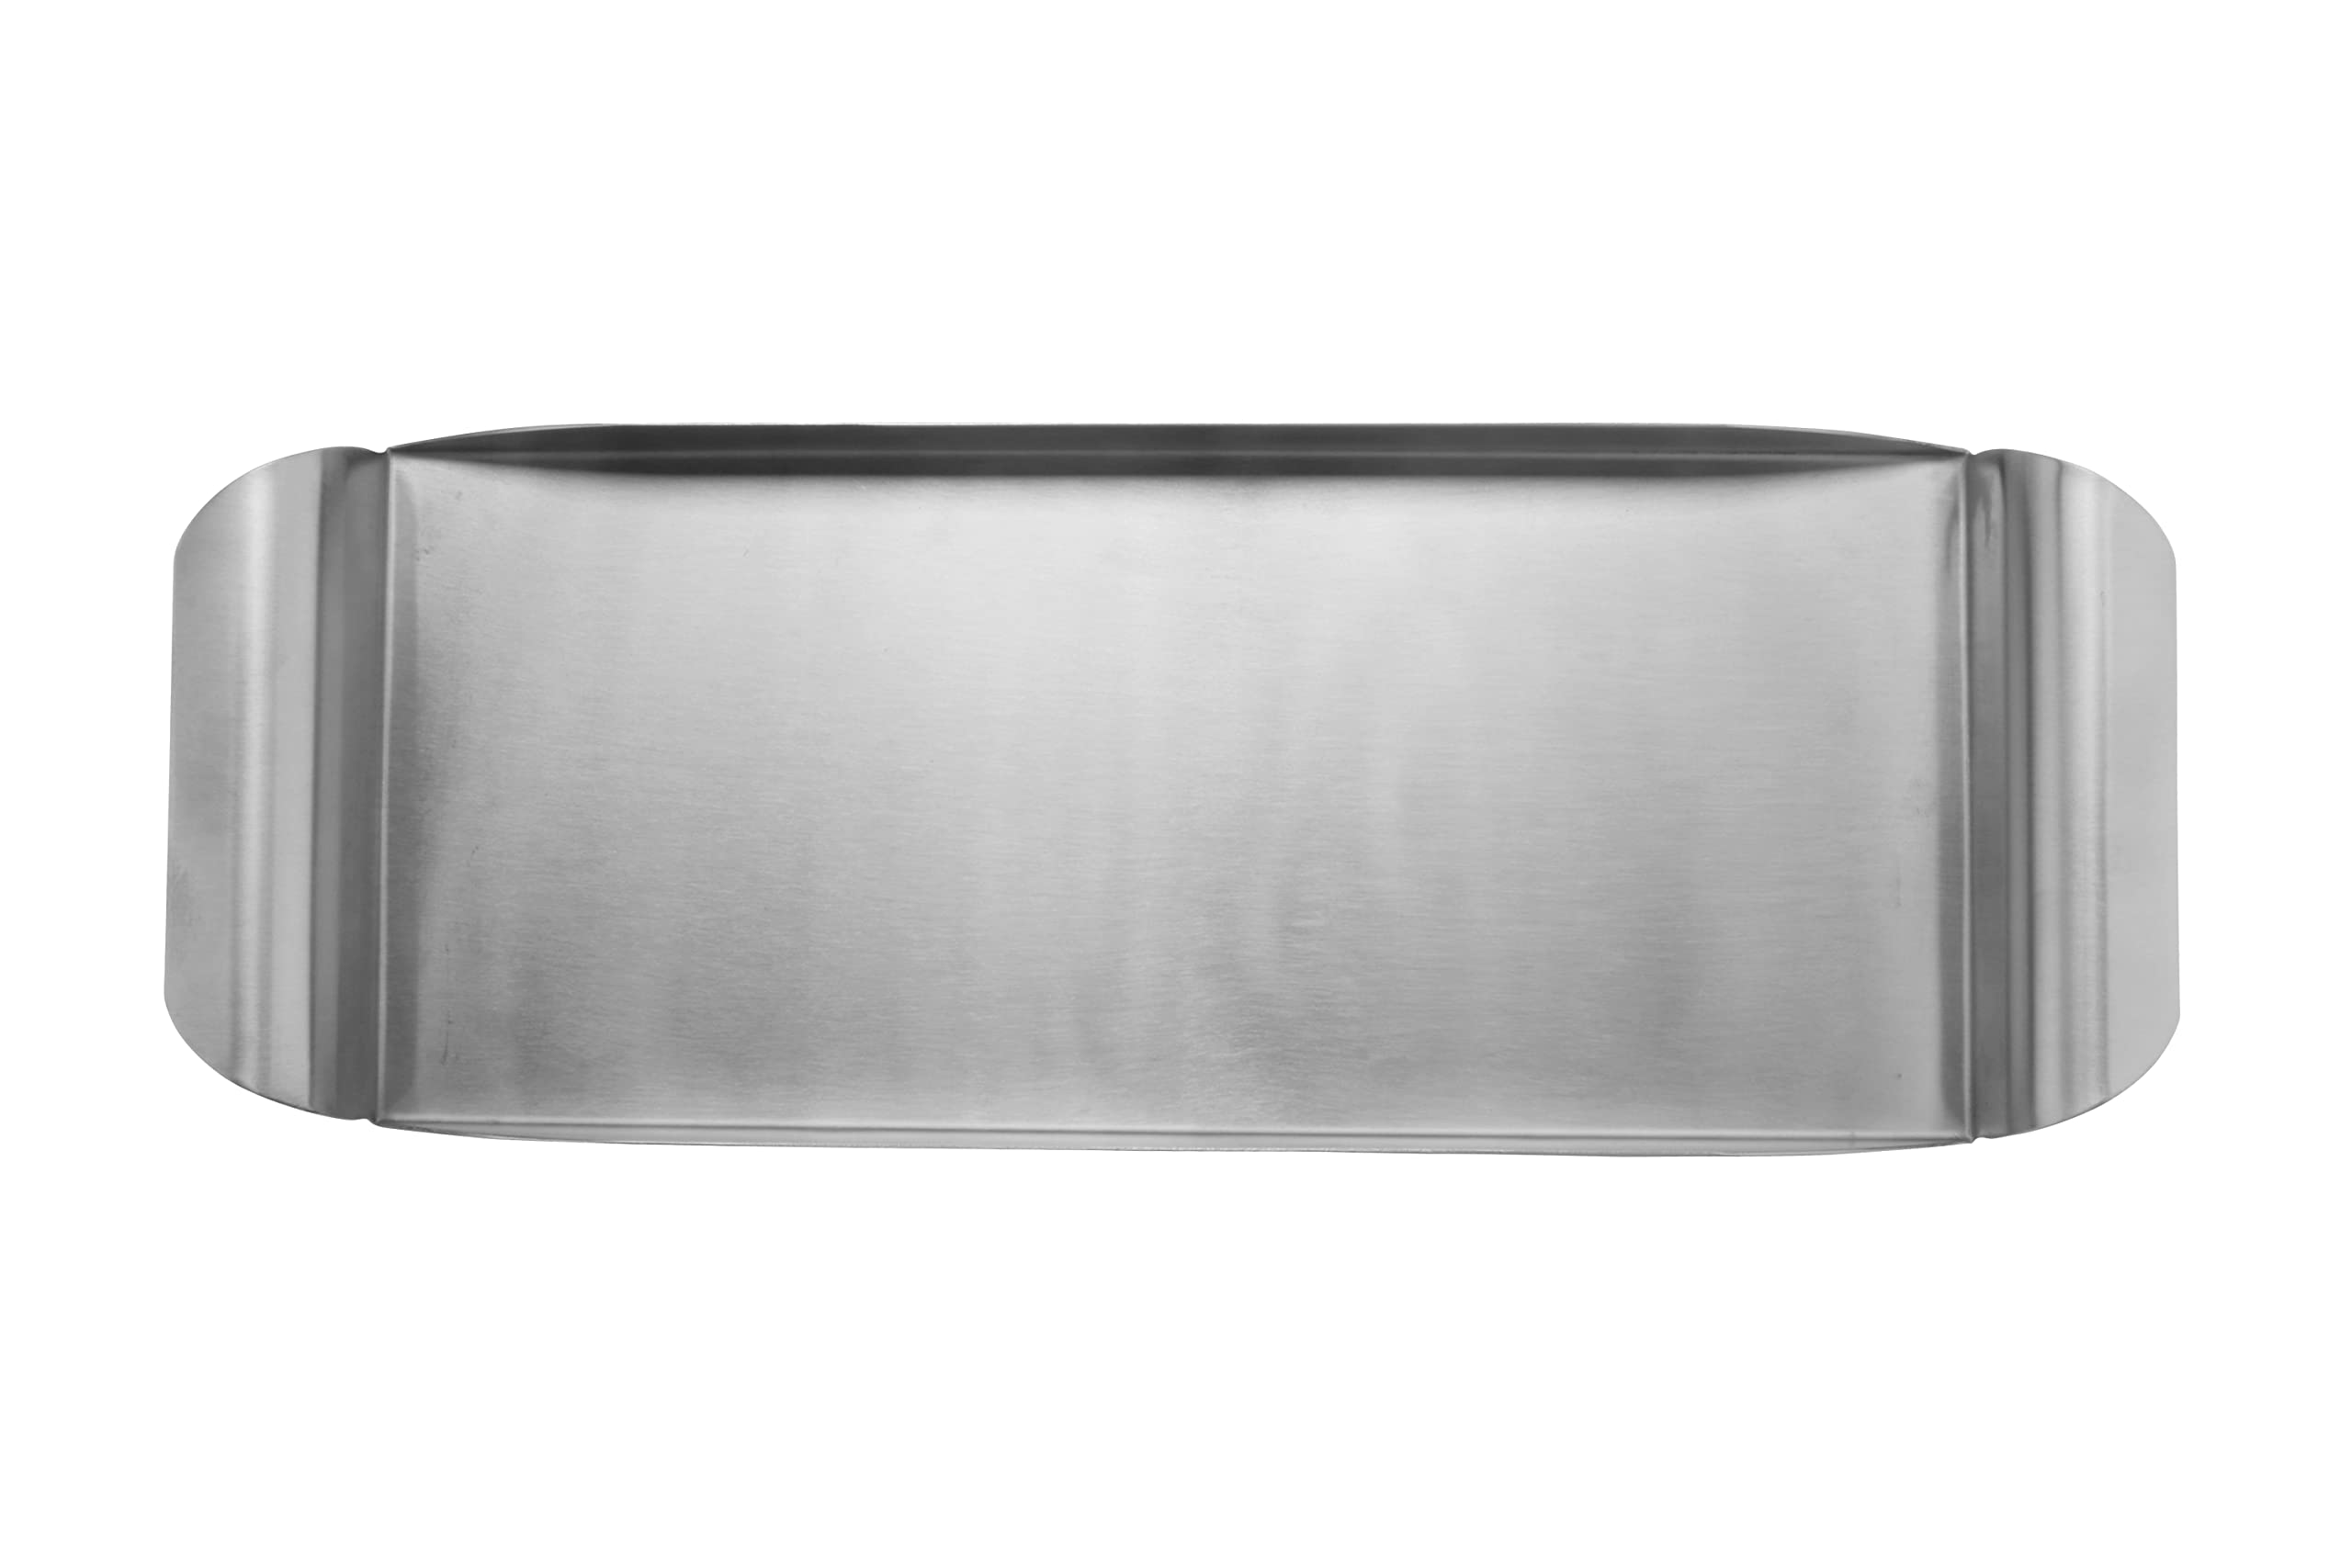 G.E.T. SST-18 Ergonomic Stainless Steel Round Decorative Serving Tray with Handles, 18